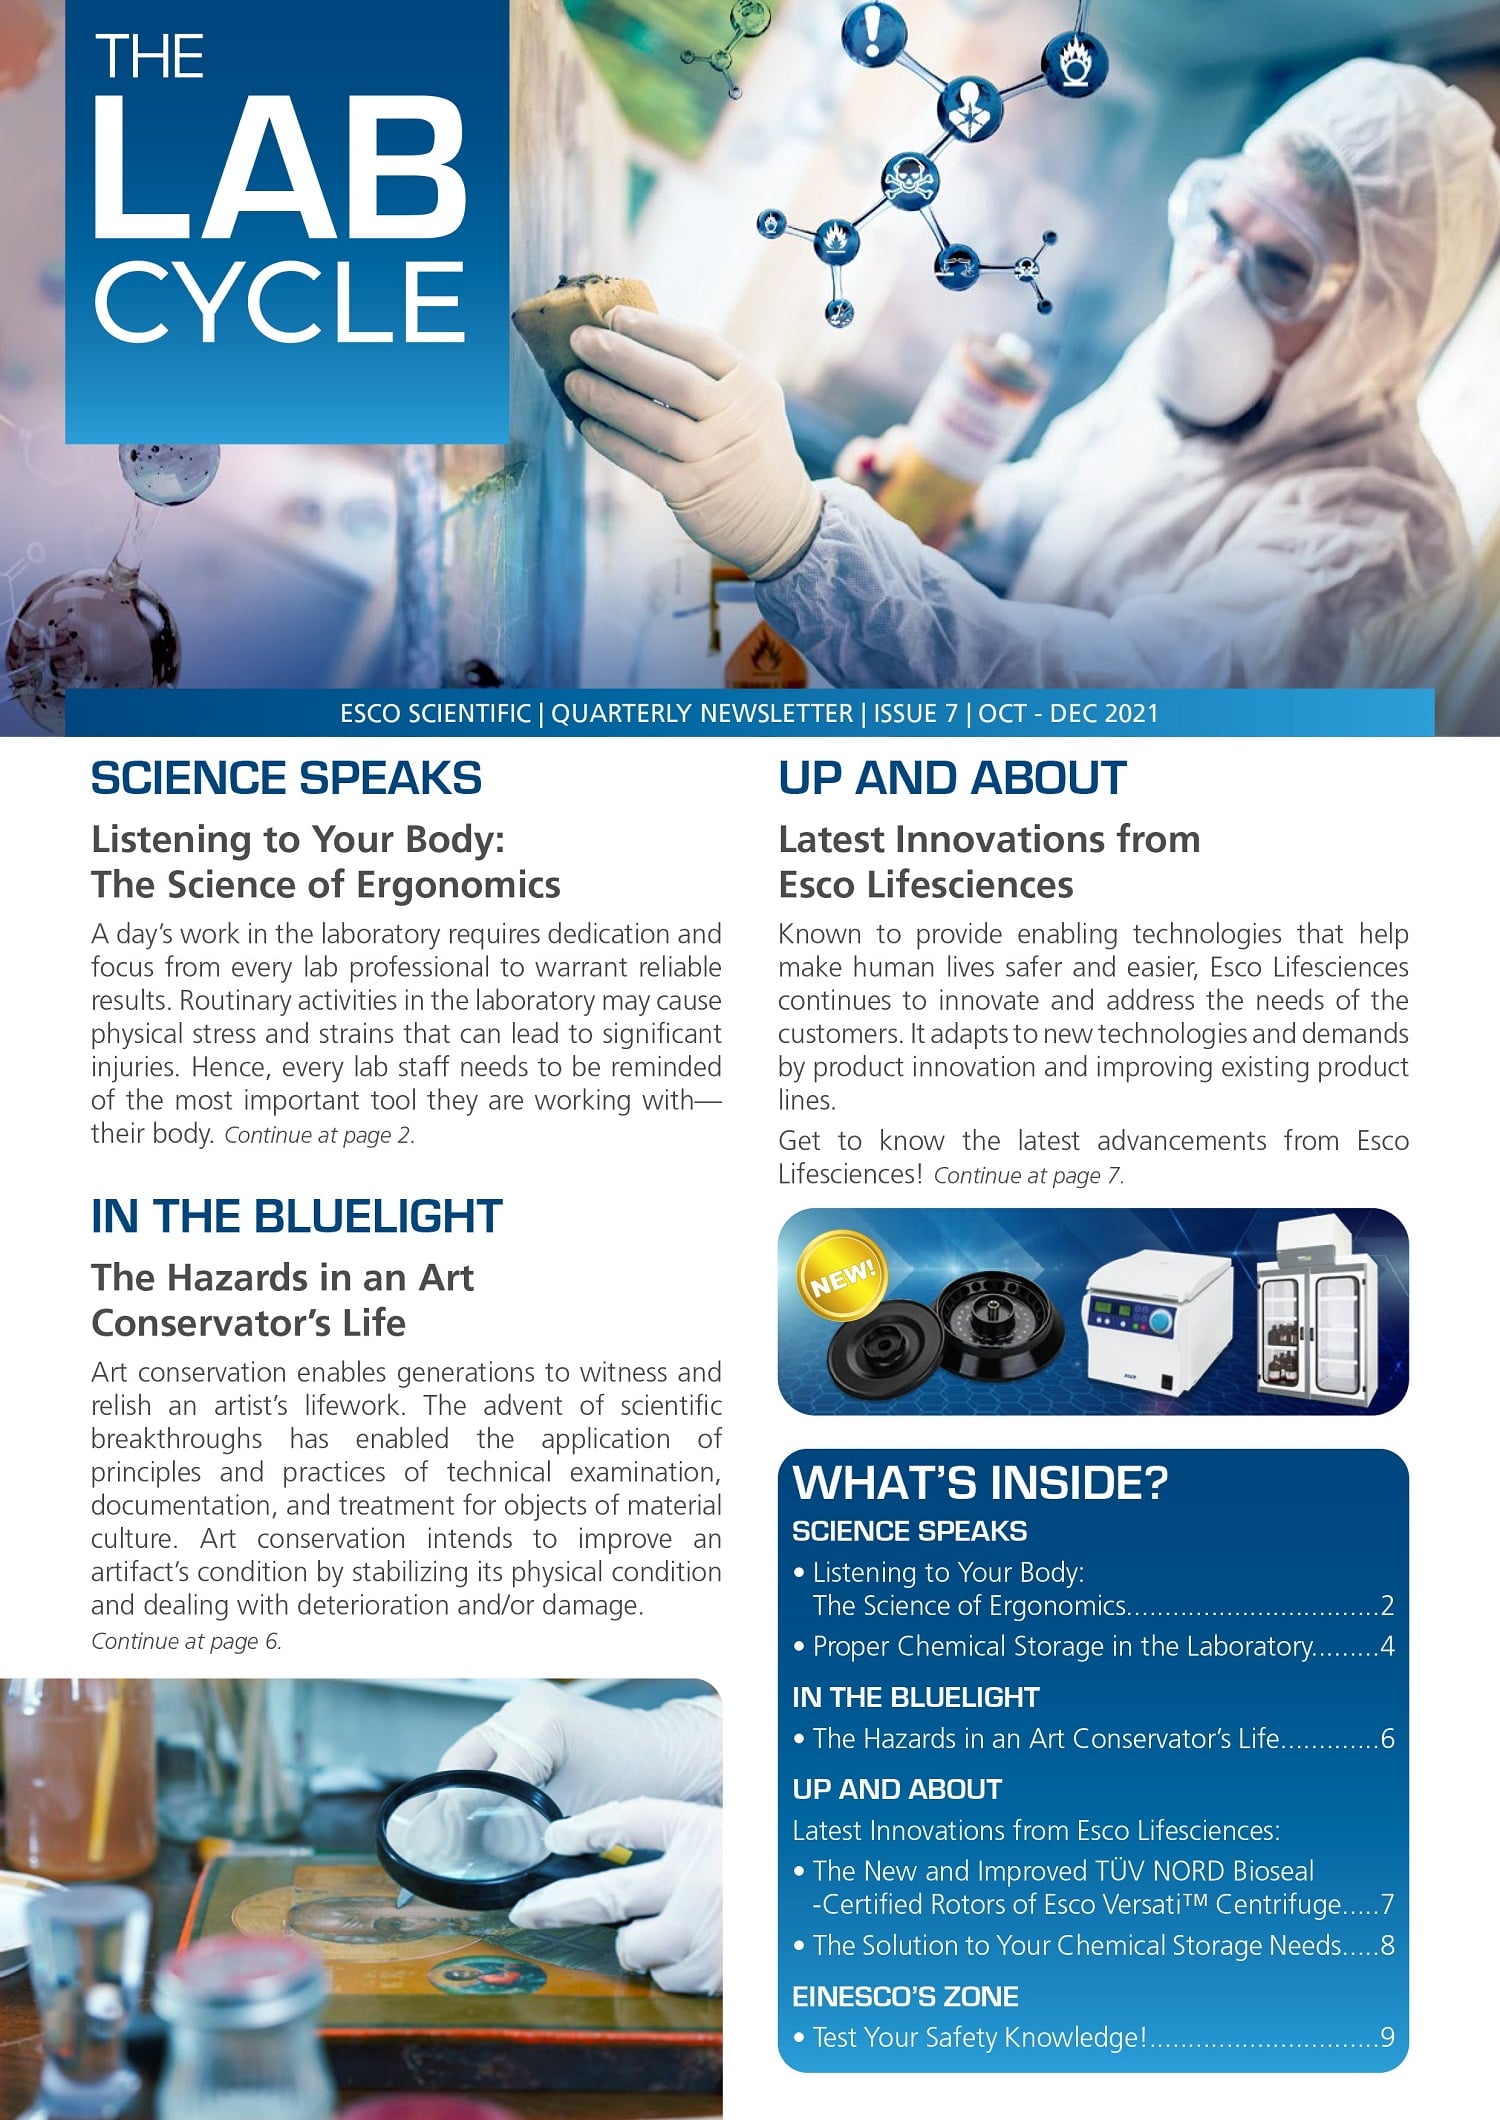 Esco Scientific’s The Lab Cycle Newsletter Issue 7